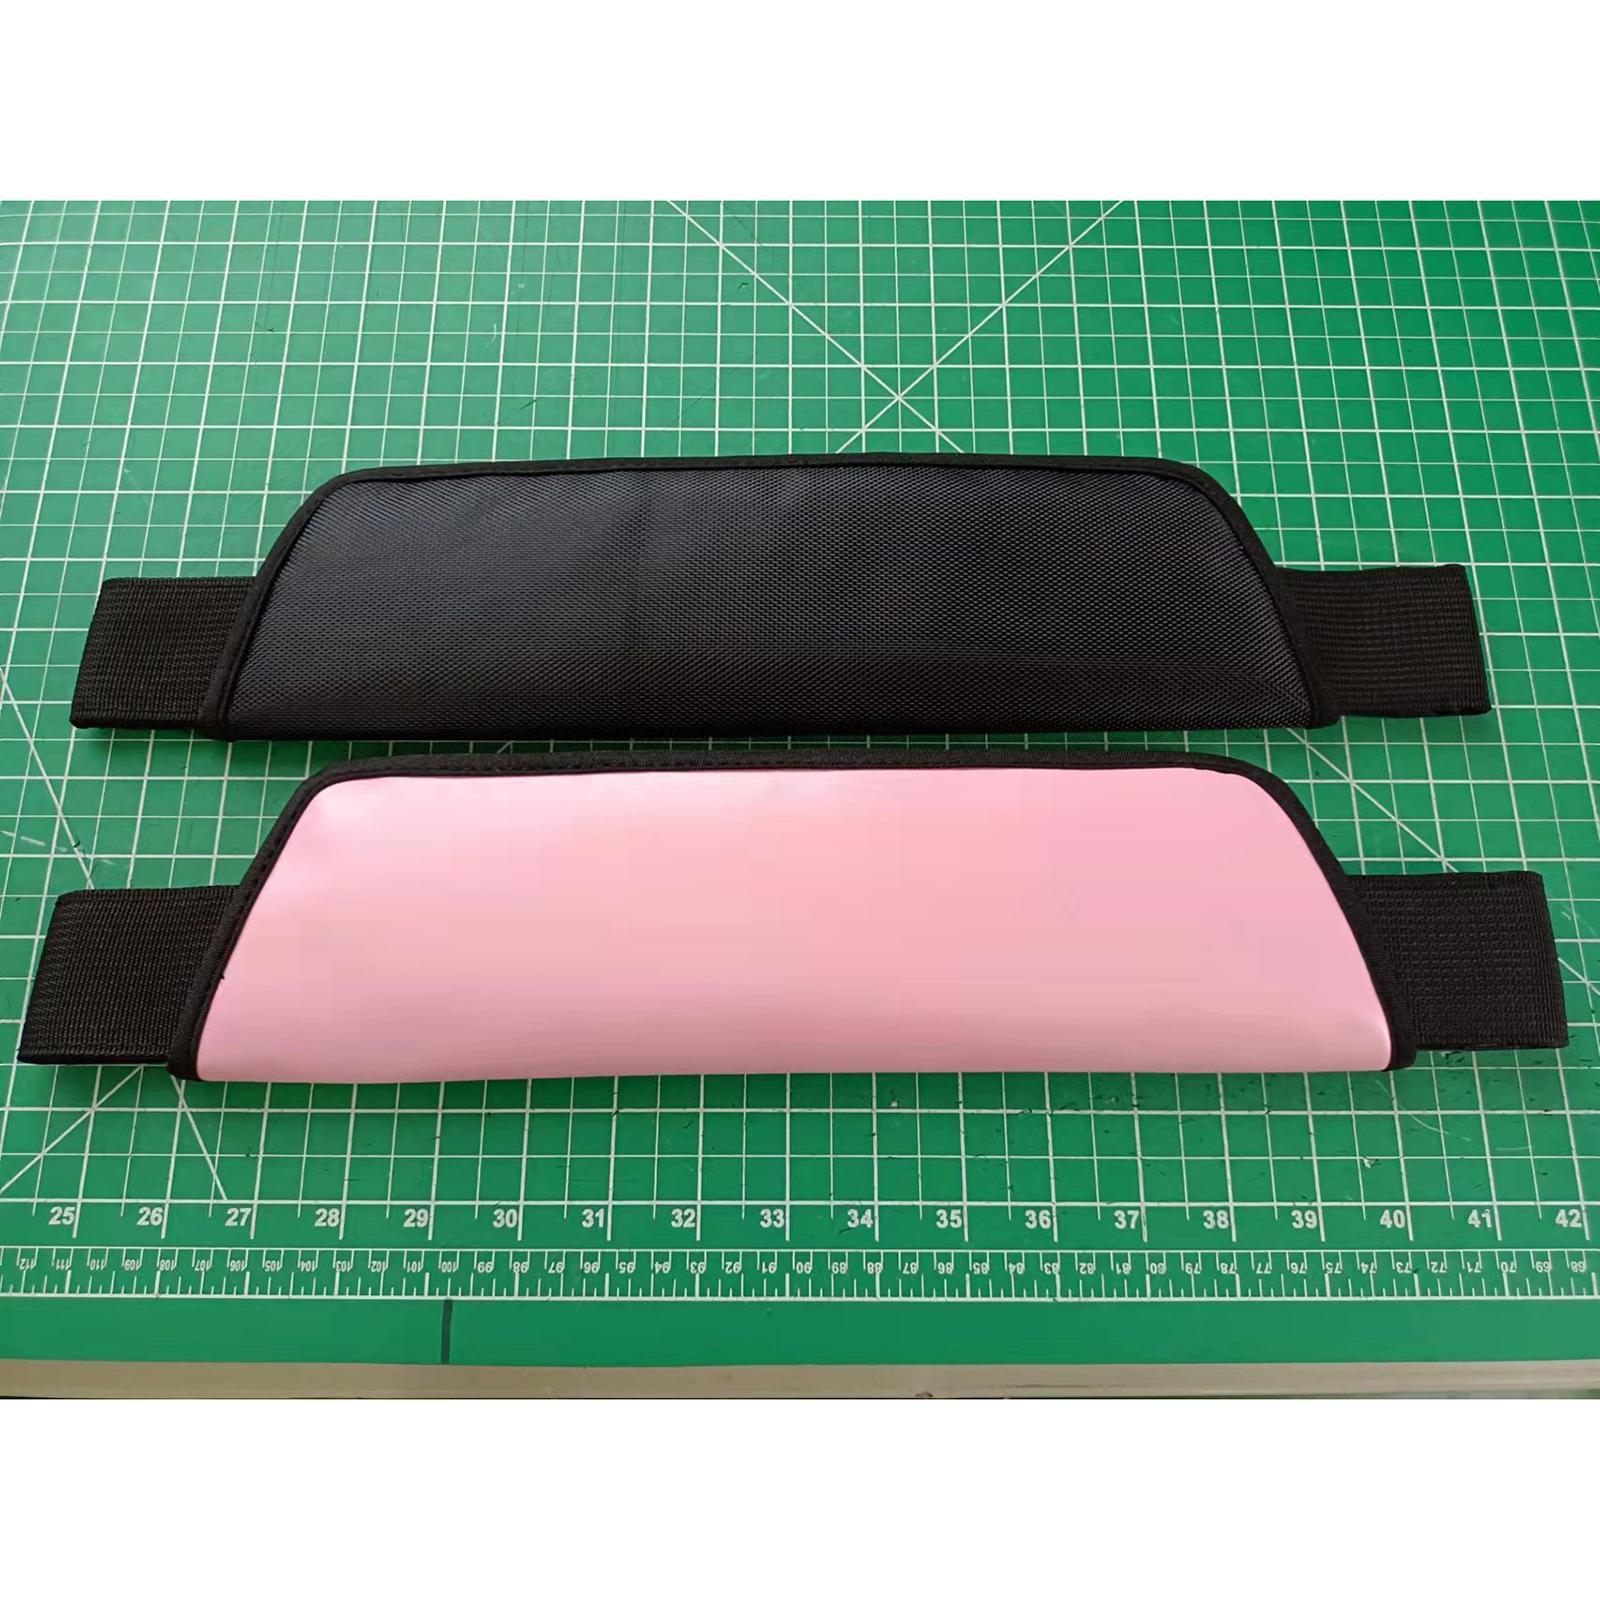 Gym Hip Thrust Pad Lunges  Squat Exercise Booty Workouts Belt Pad